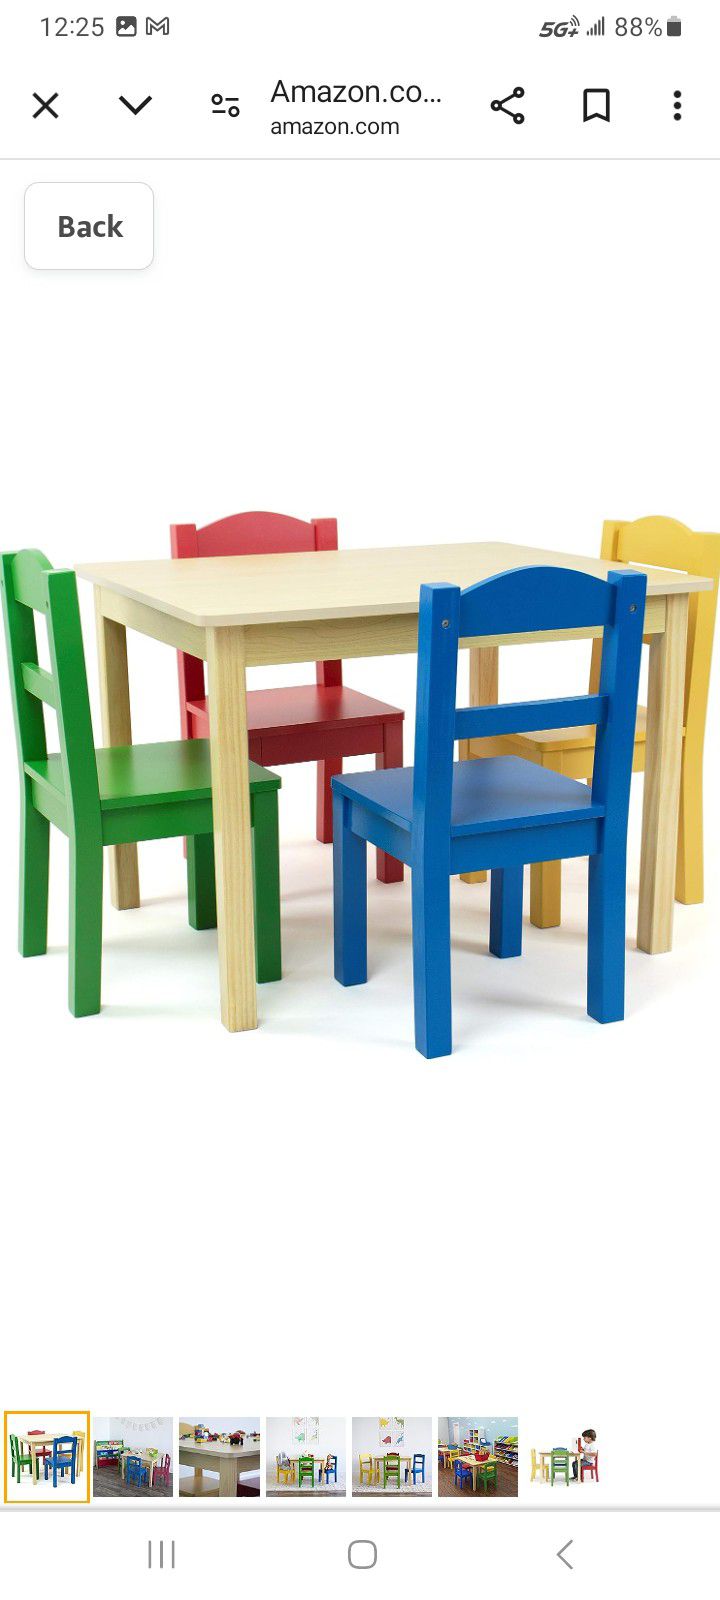 Kids Table With Chairs